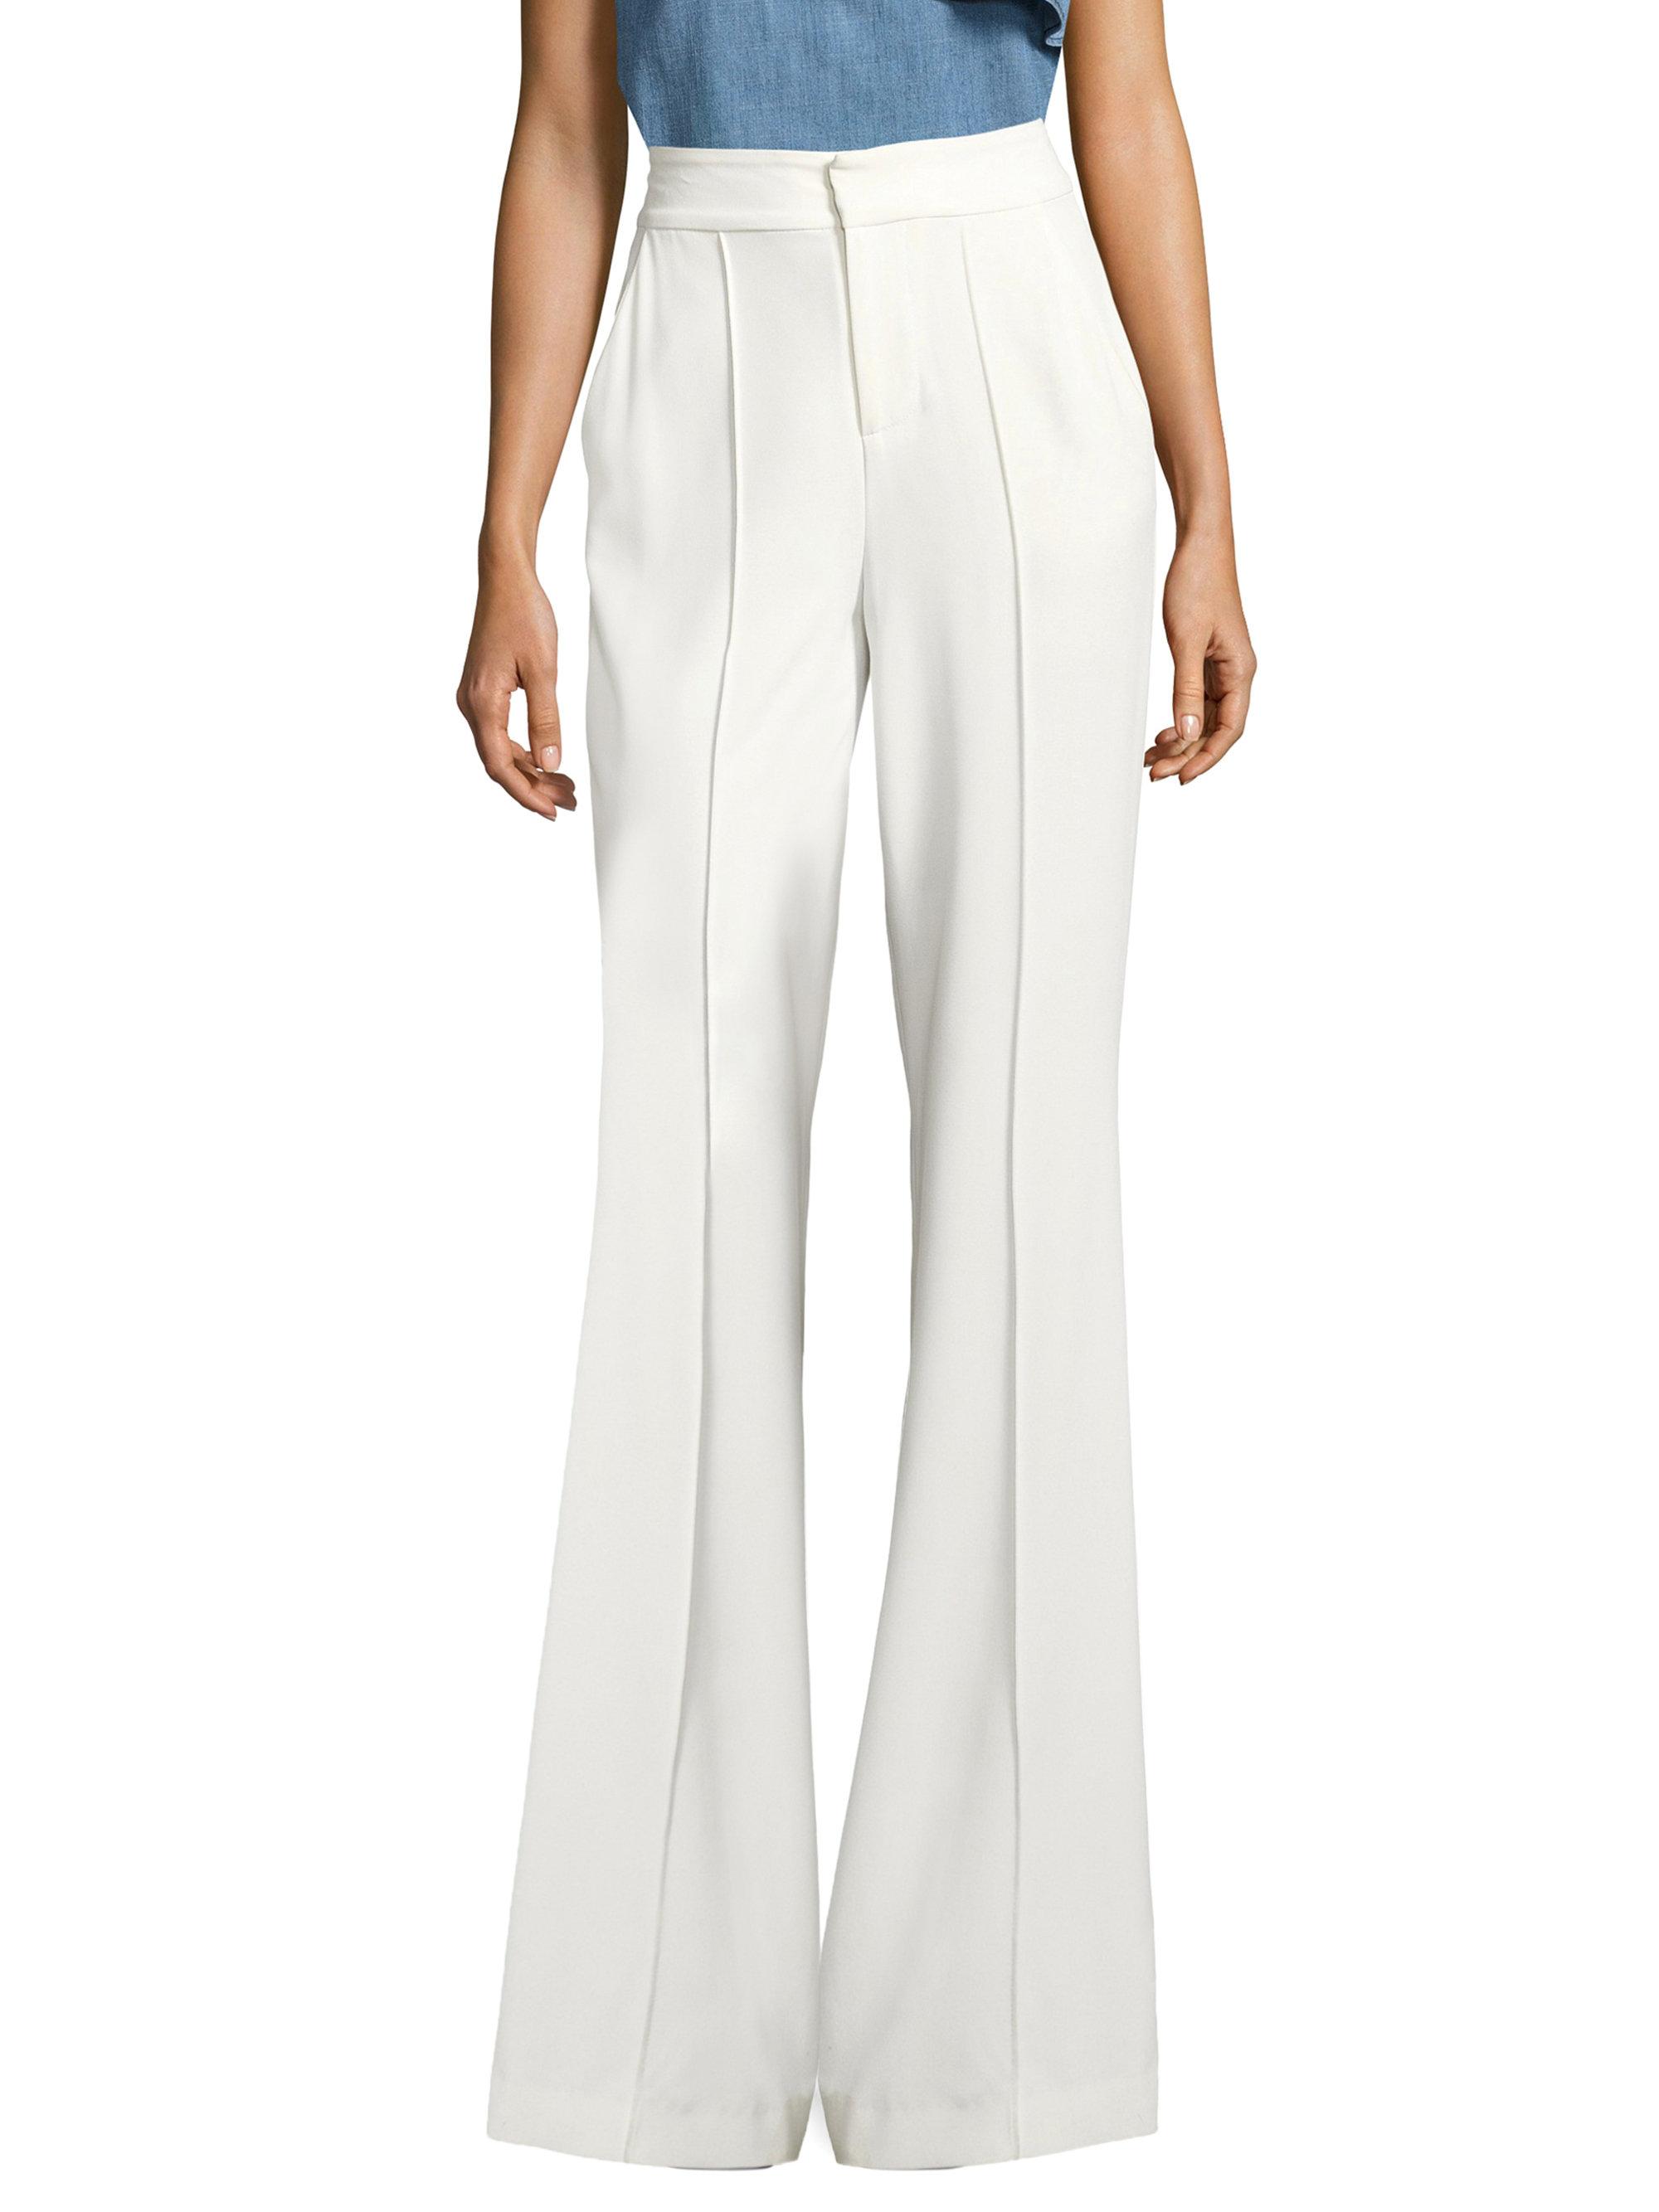 Lyst - Alice + Olivia Dylan High-waist Wide-leg Pants in White